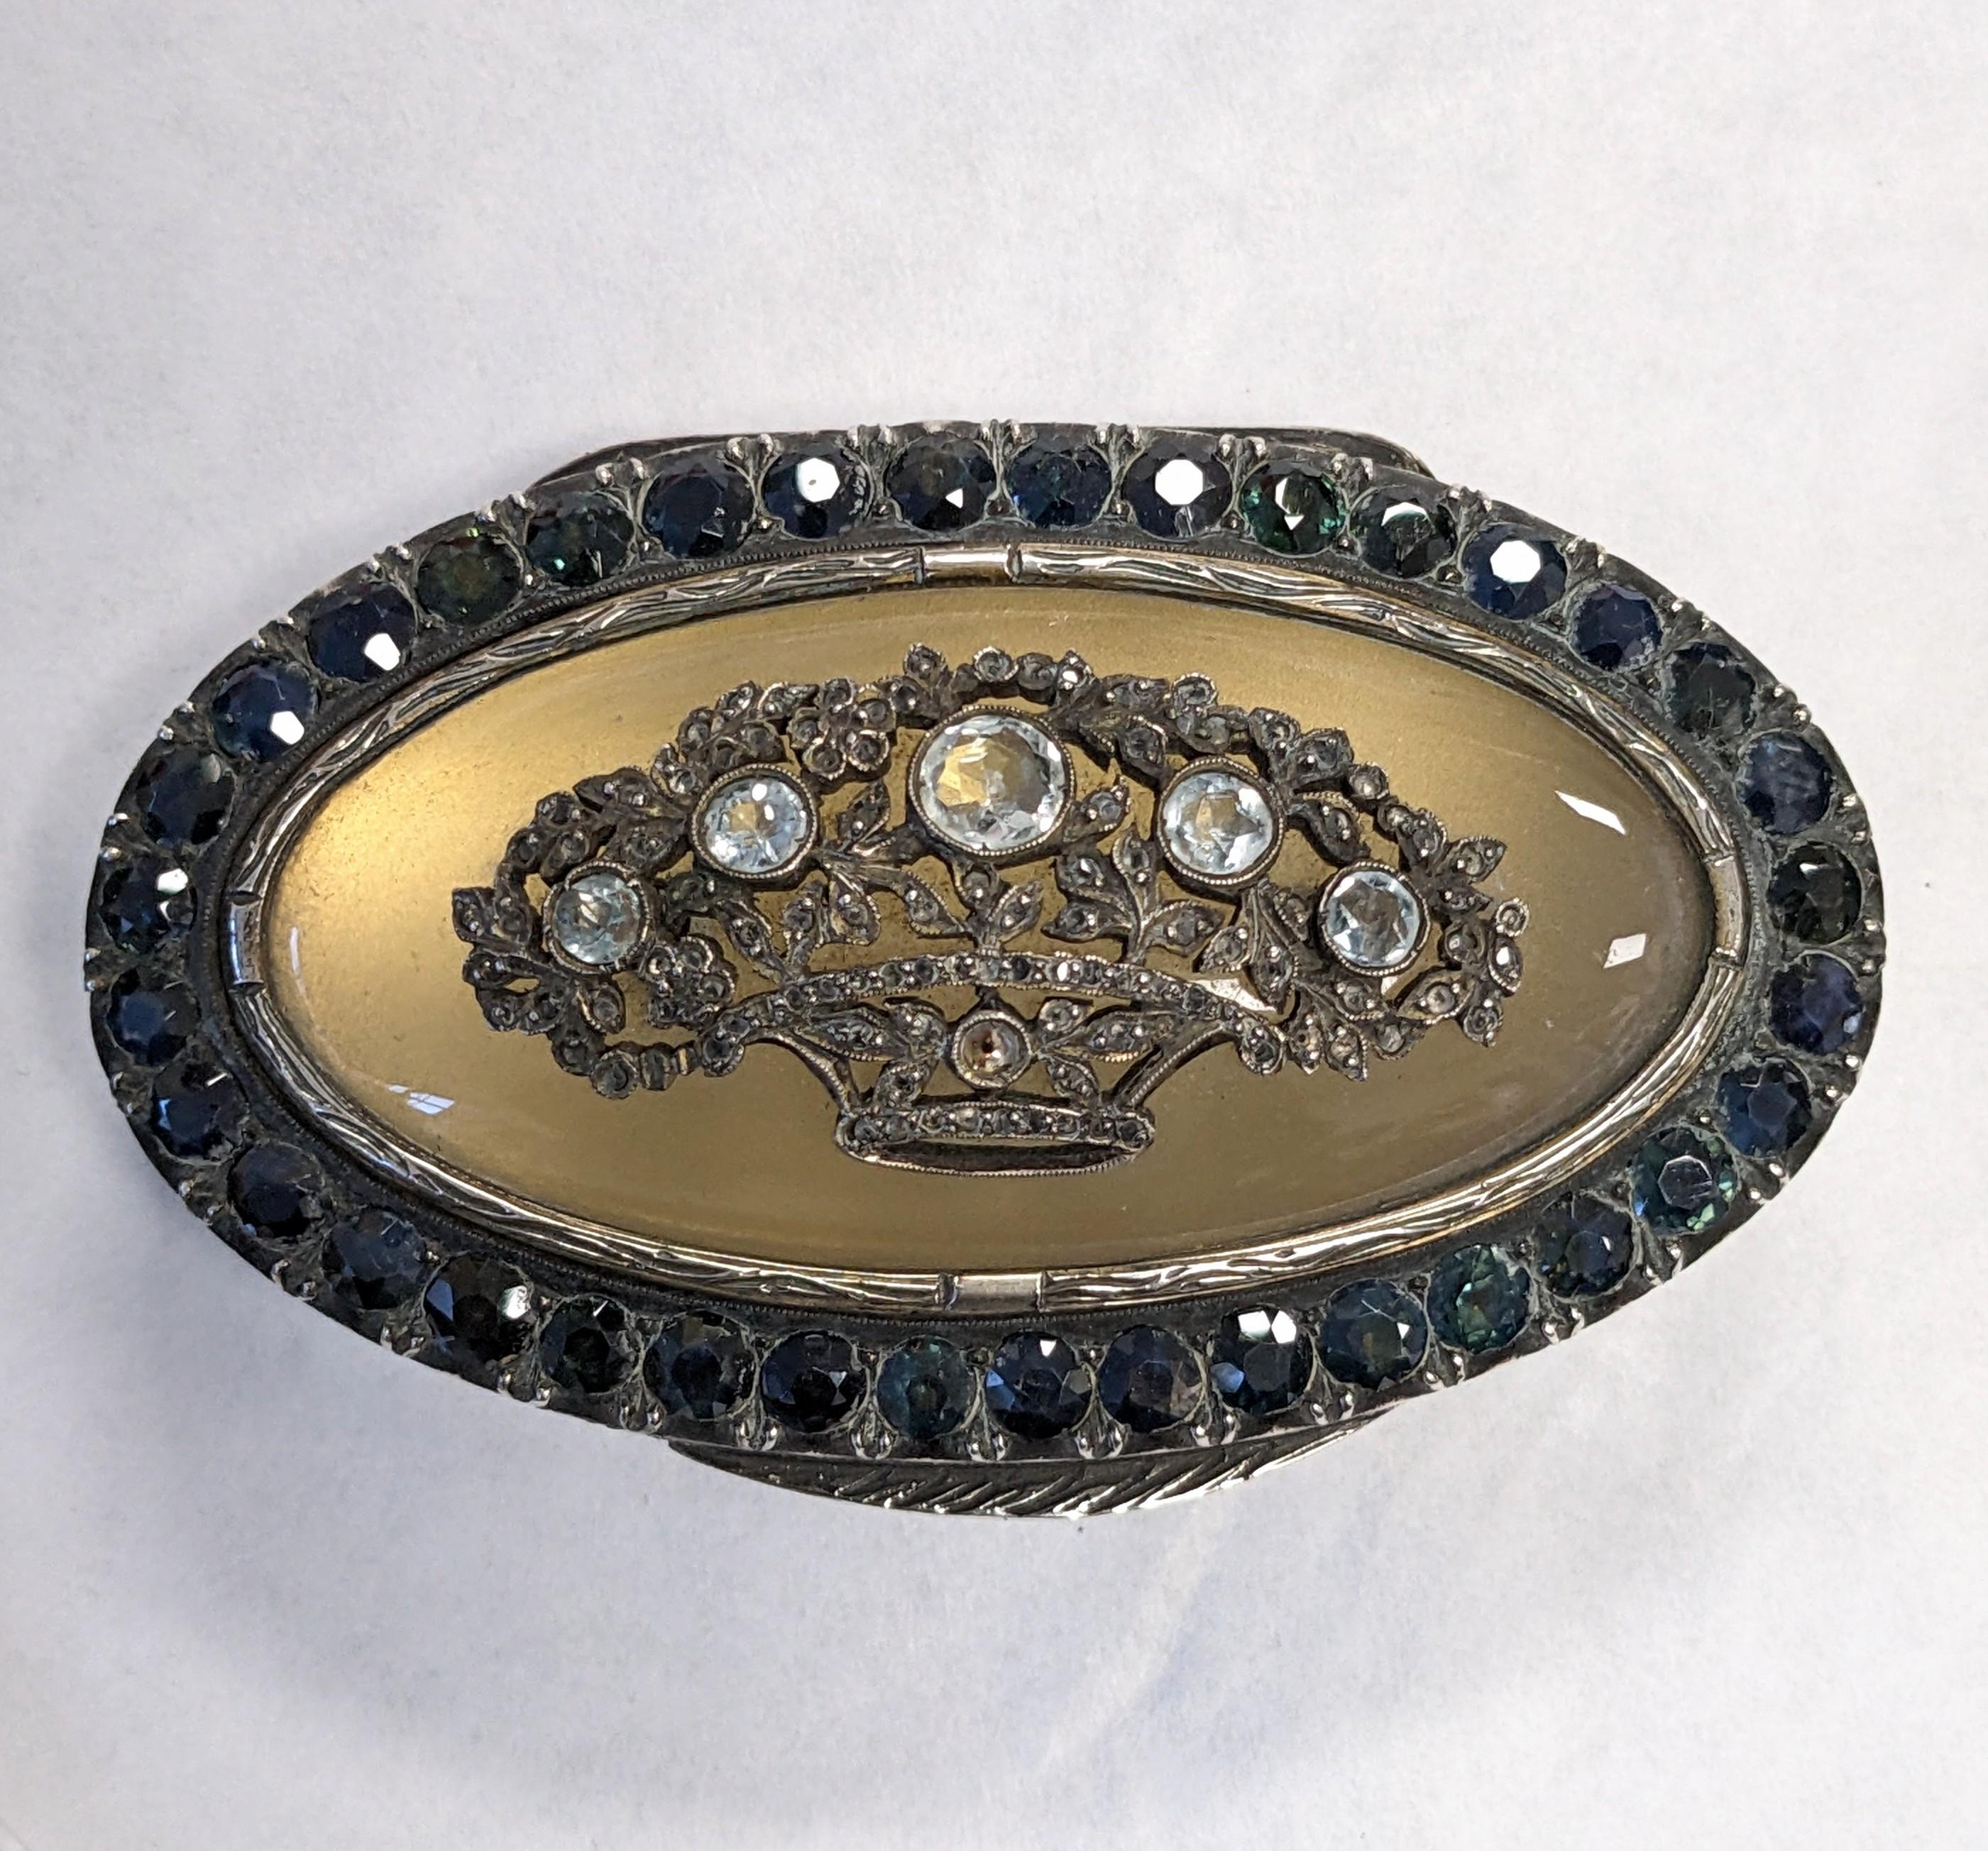 Charming Gem Set Frosted Rock Crystal Silver Box in etched vermeil silver with basket motif set with aquamarines and tiny diamond chips in a border of round sapphires. Giardinetto motif of basket with diamonds and aquas set into the rock crystal.